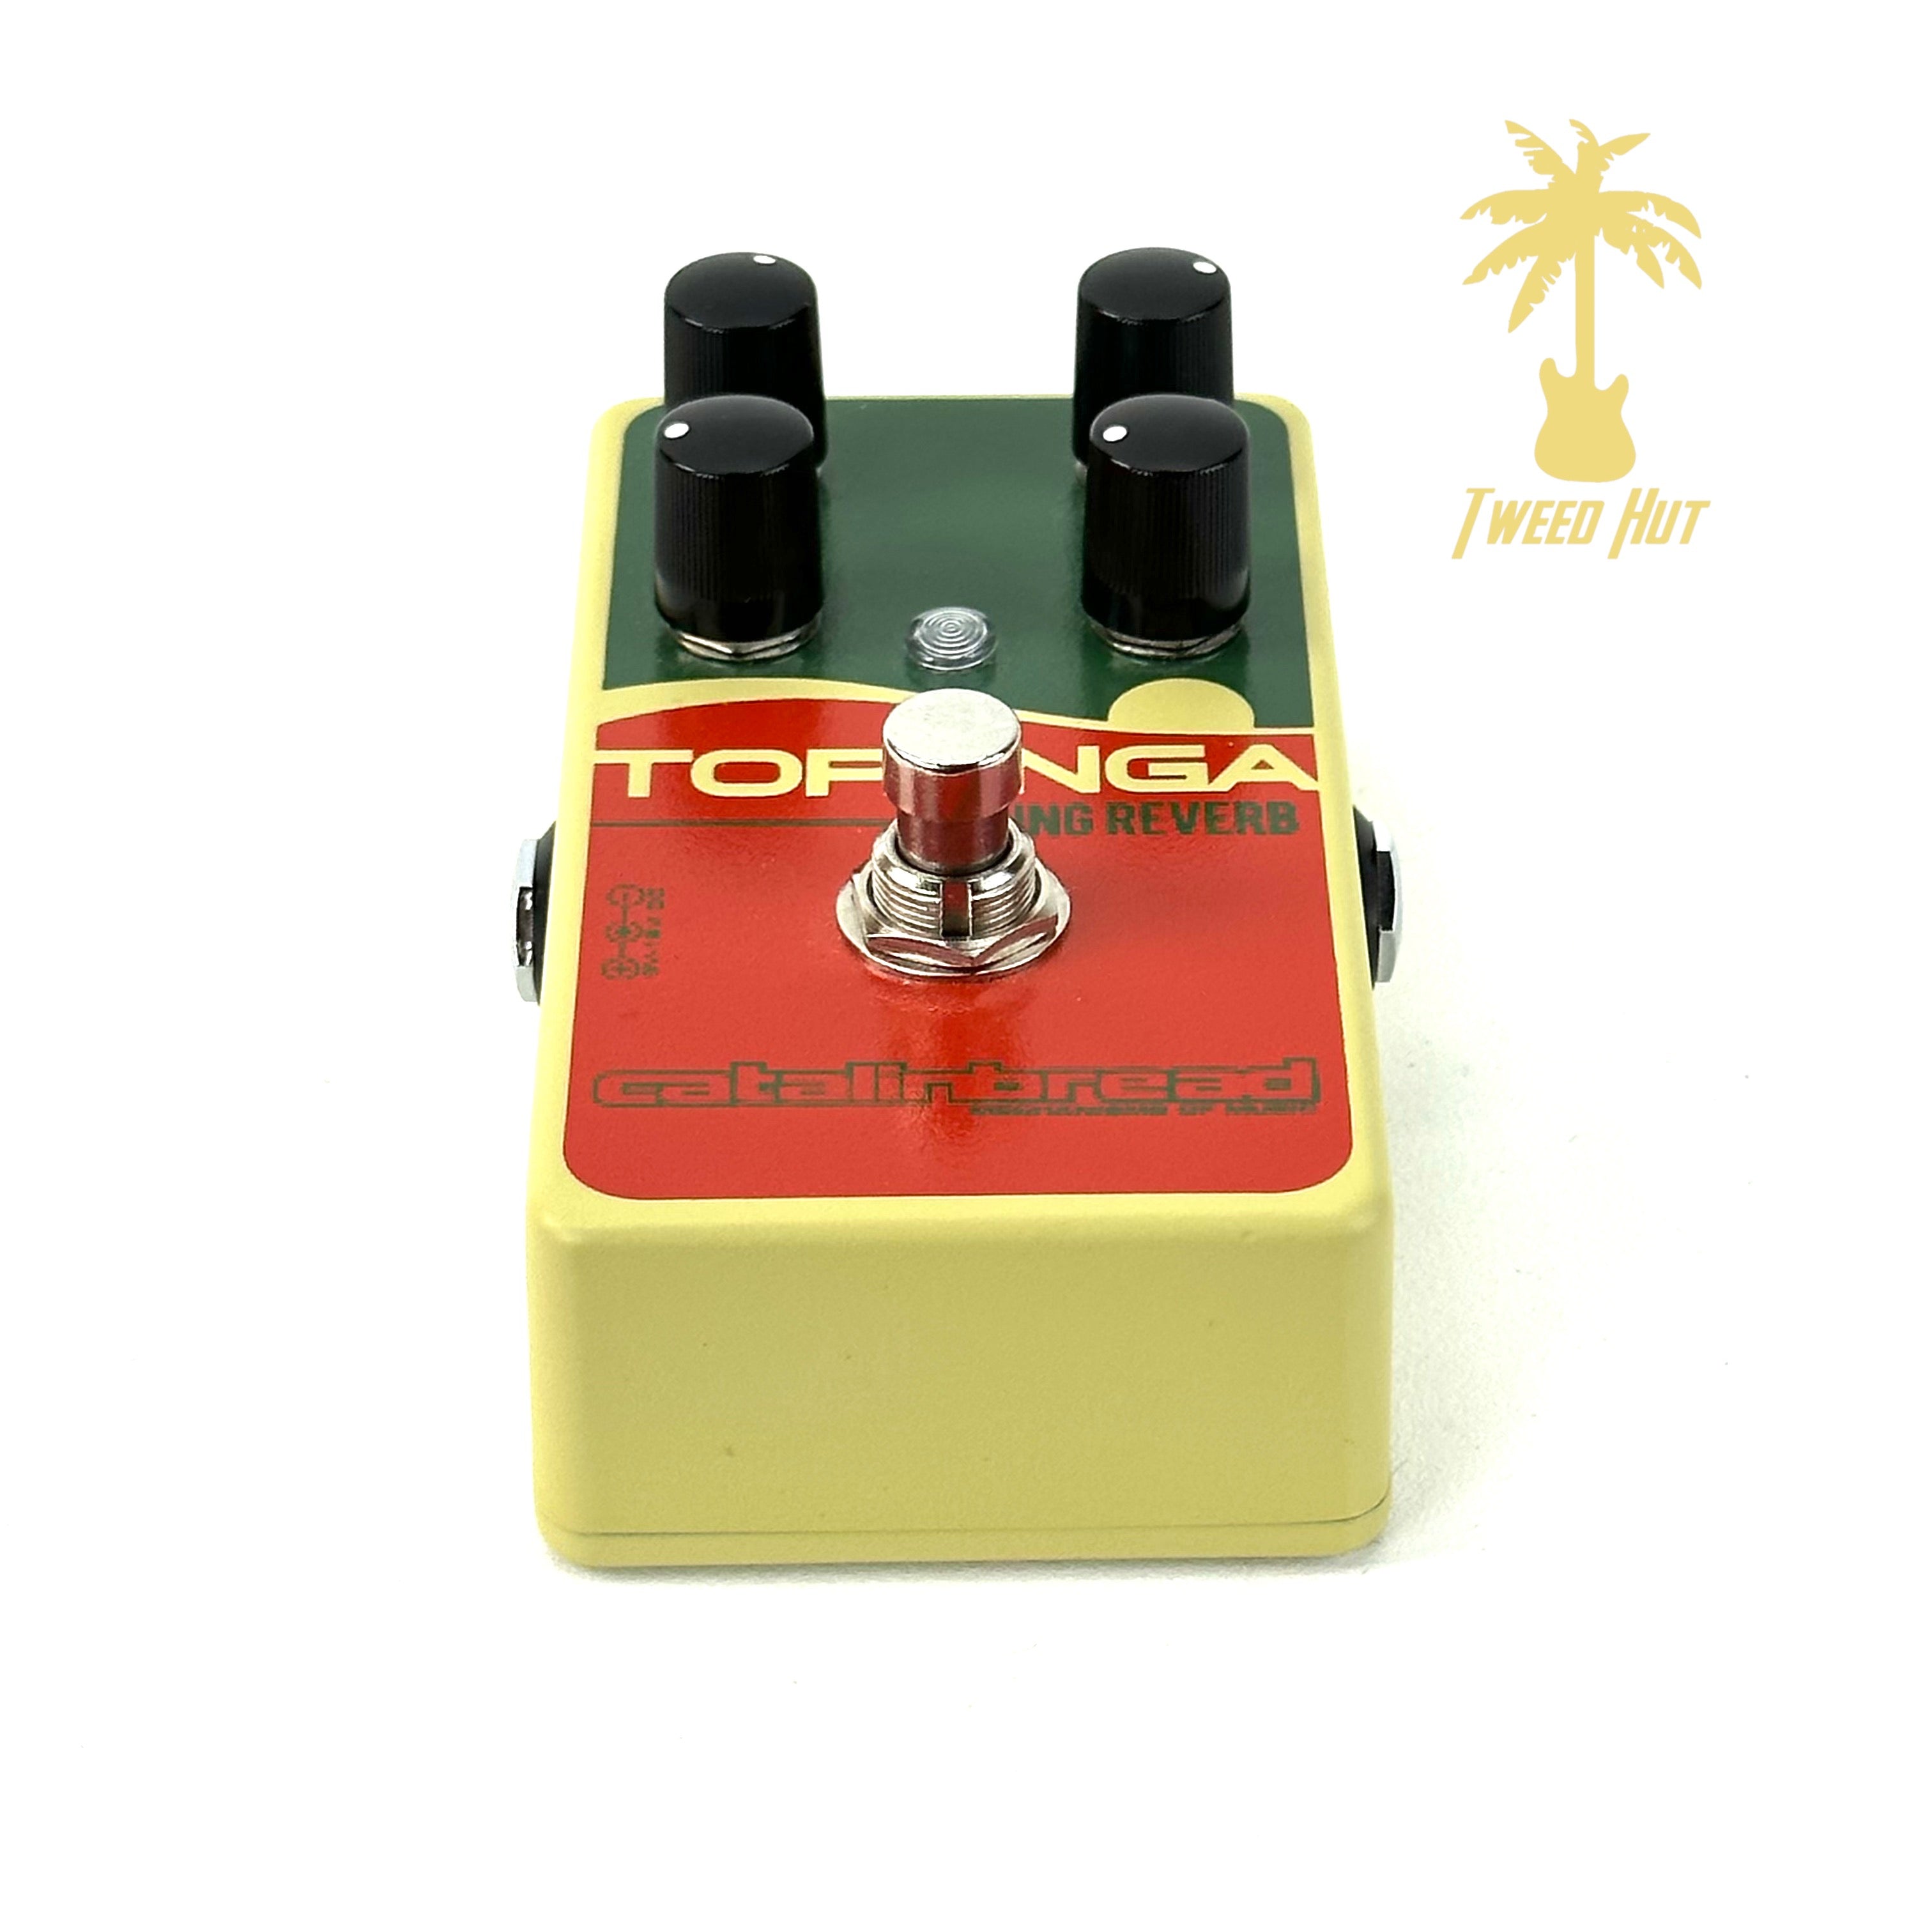 PRE-OWNED CATALINBREAD TOPANGA SPRING REVERB PEDAL